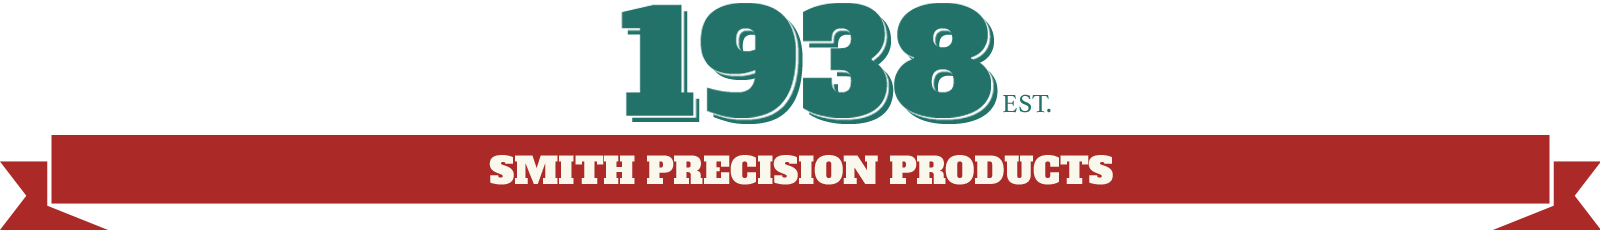 Smith Precision Products Established 1938